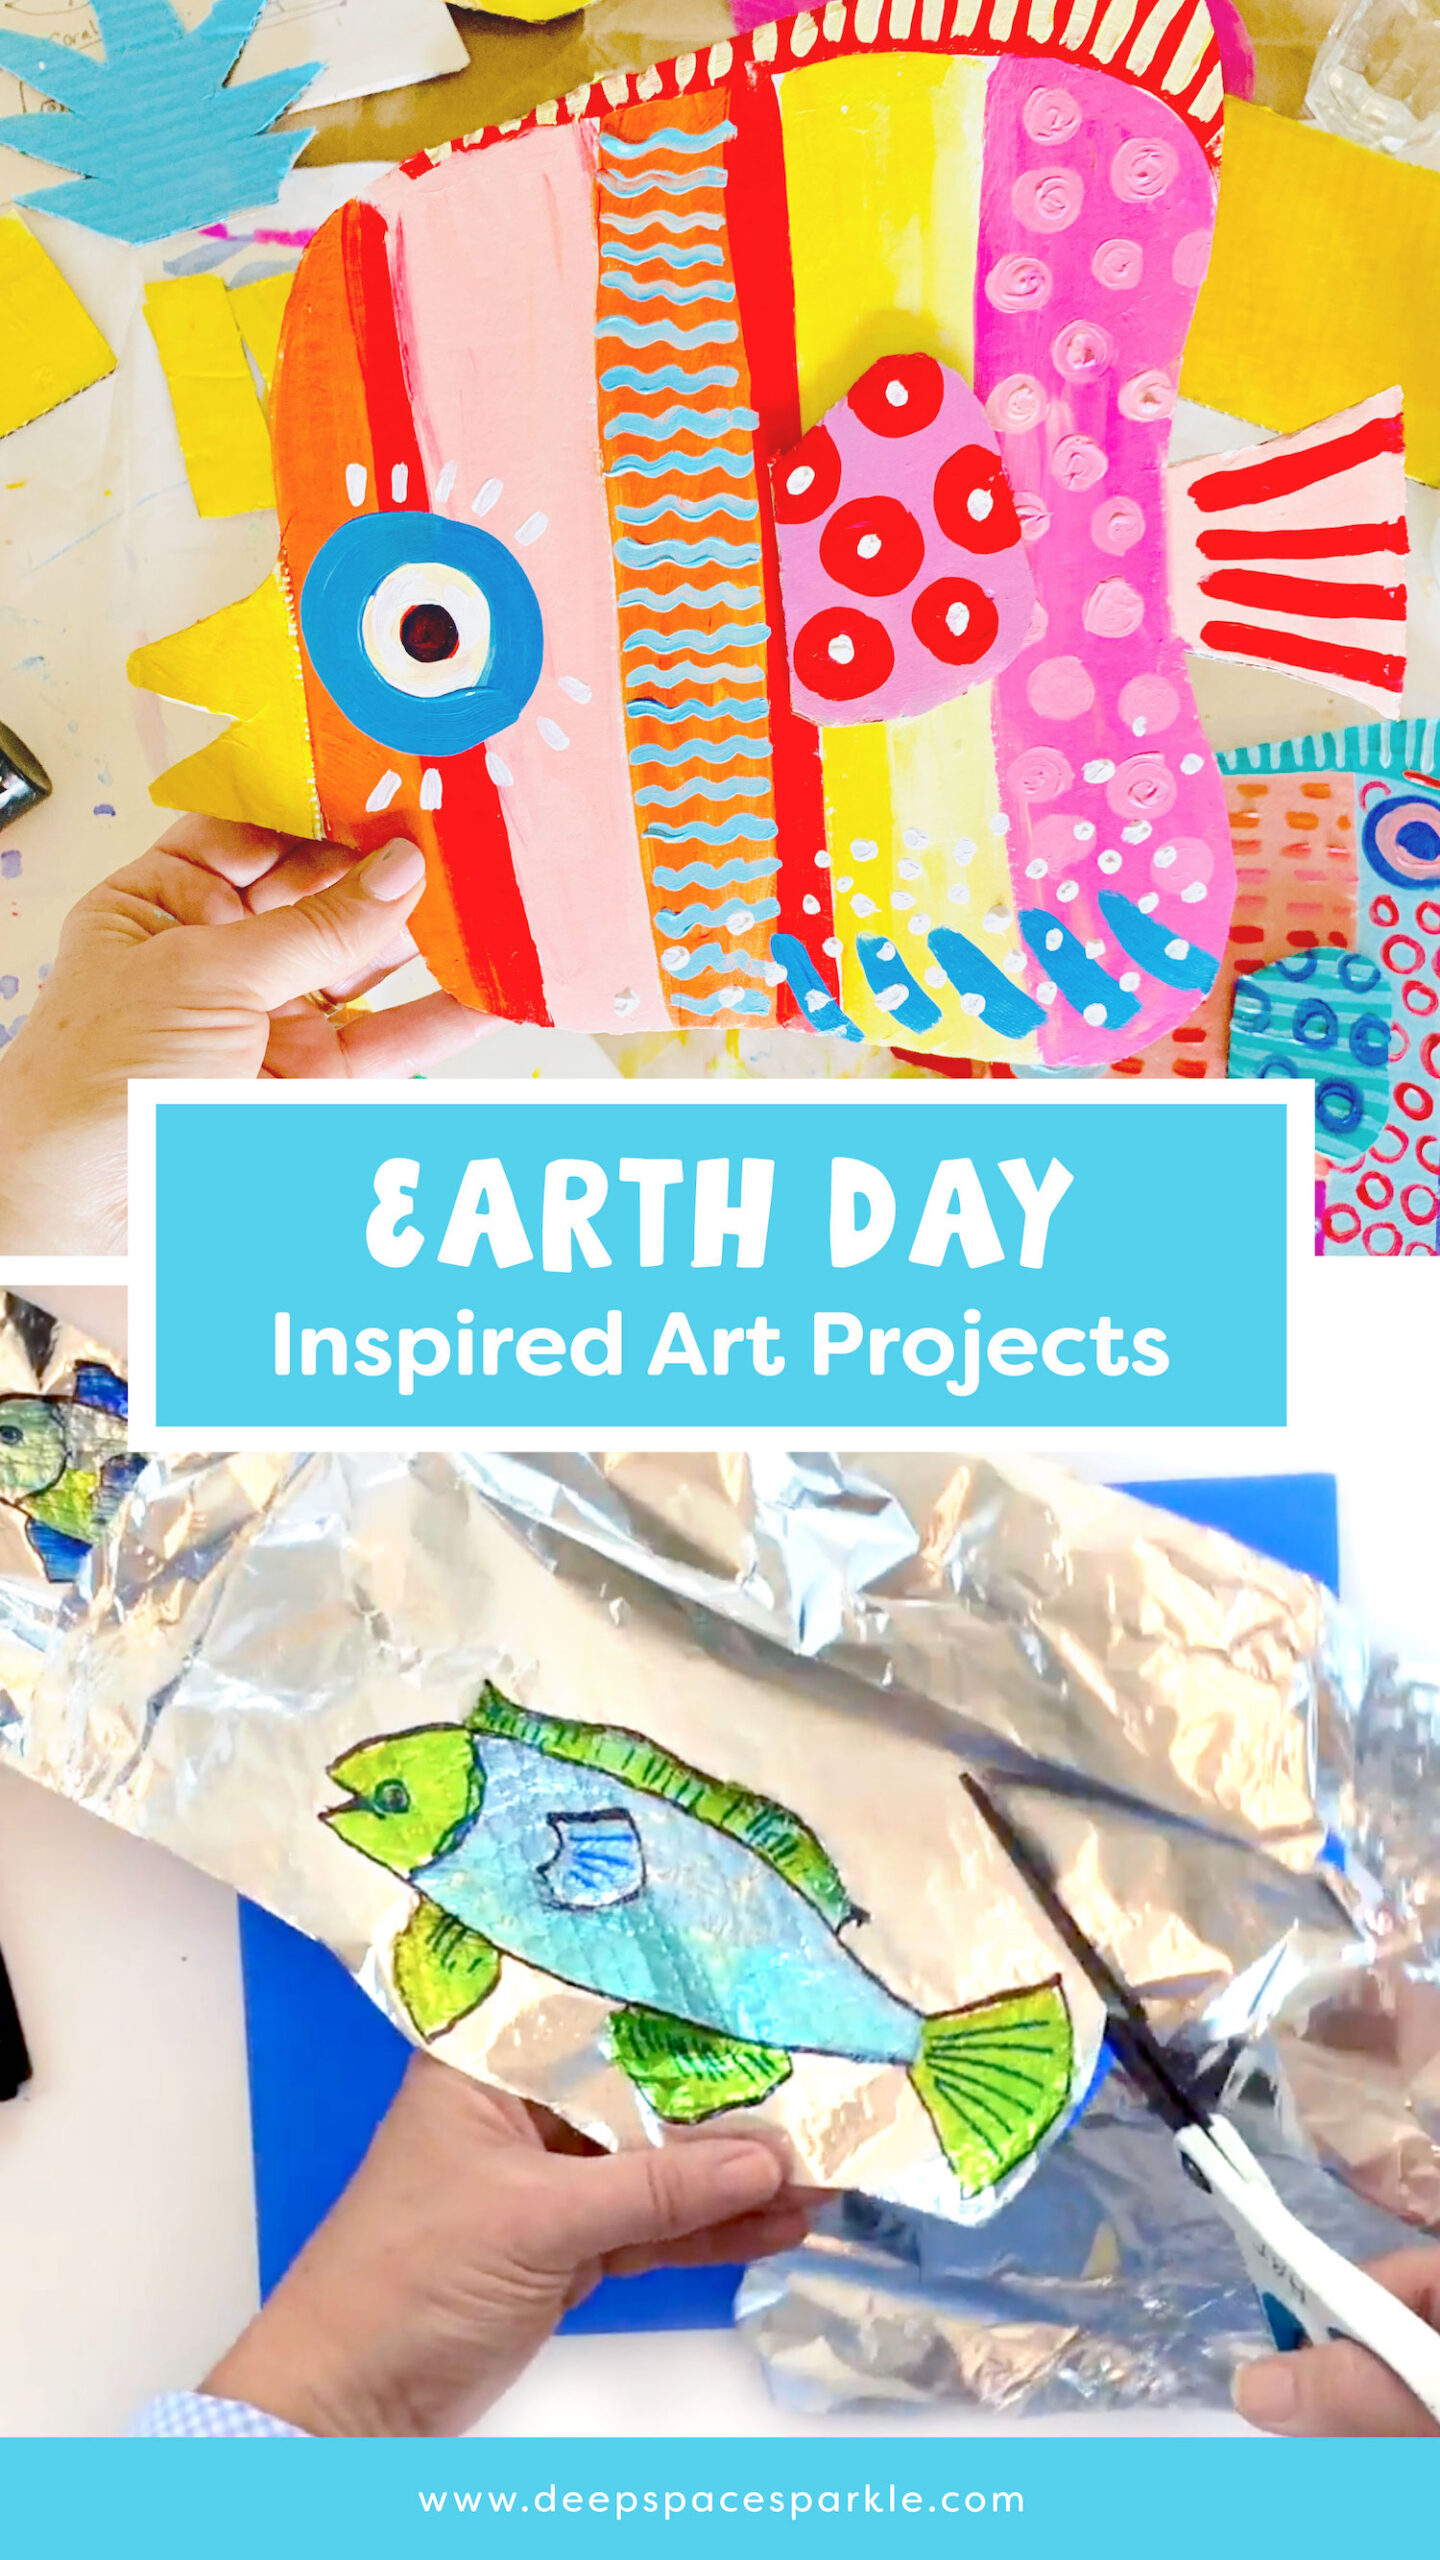 Art Projects Inspired by Earth Day